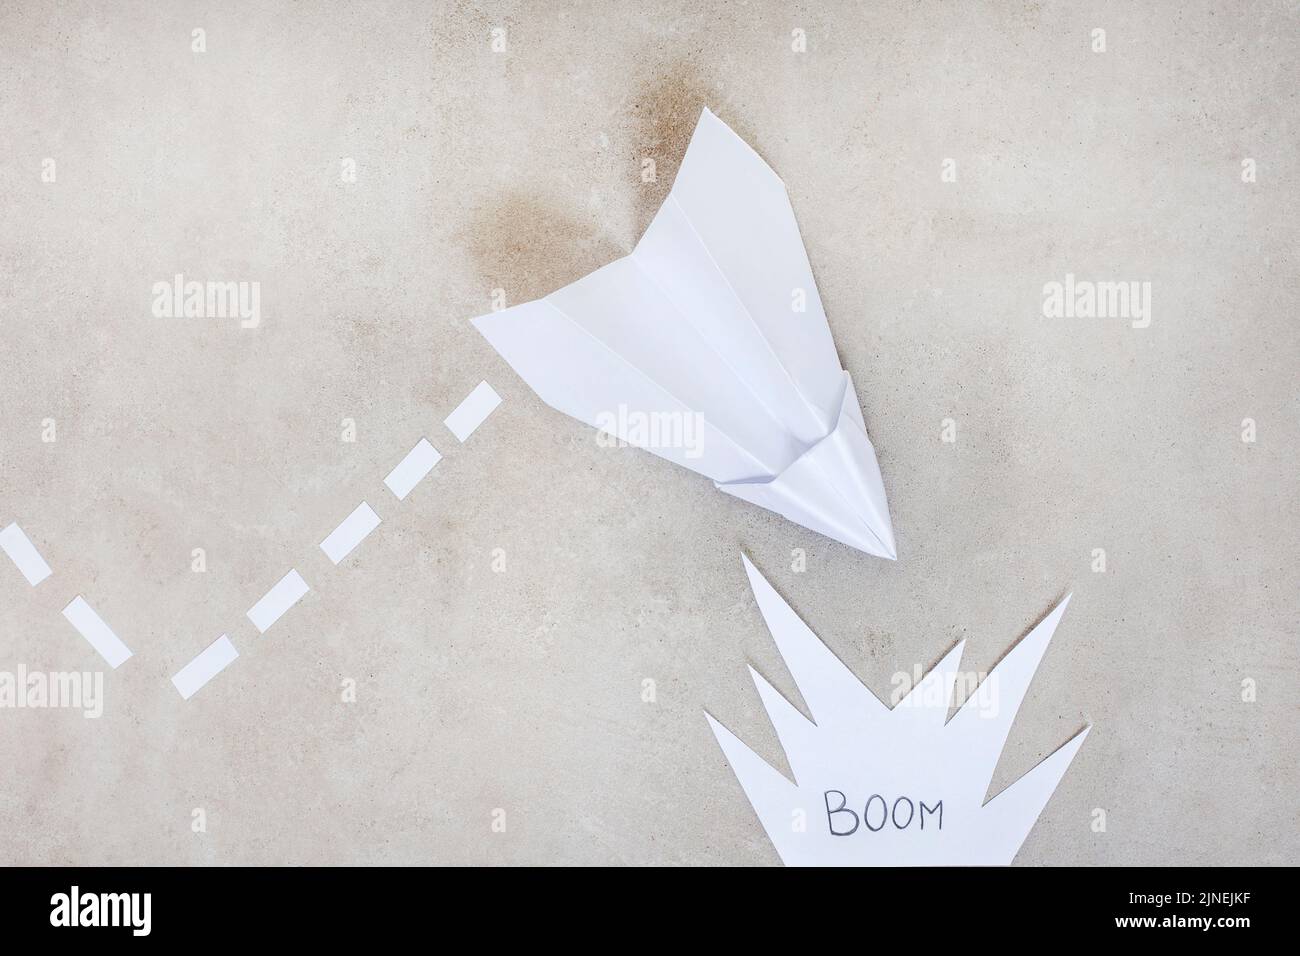 Paper airplane as metaphor, heading for a crash or explosion, on grey with copy space Stock Photo